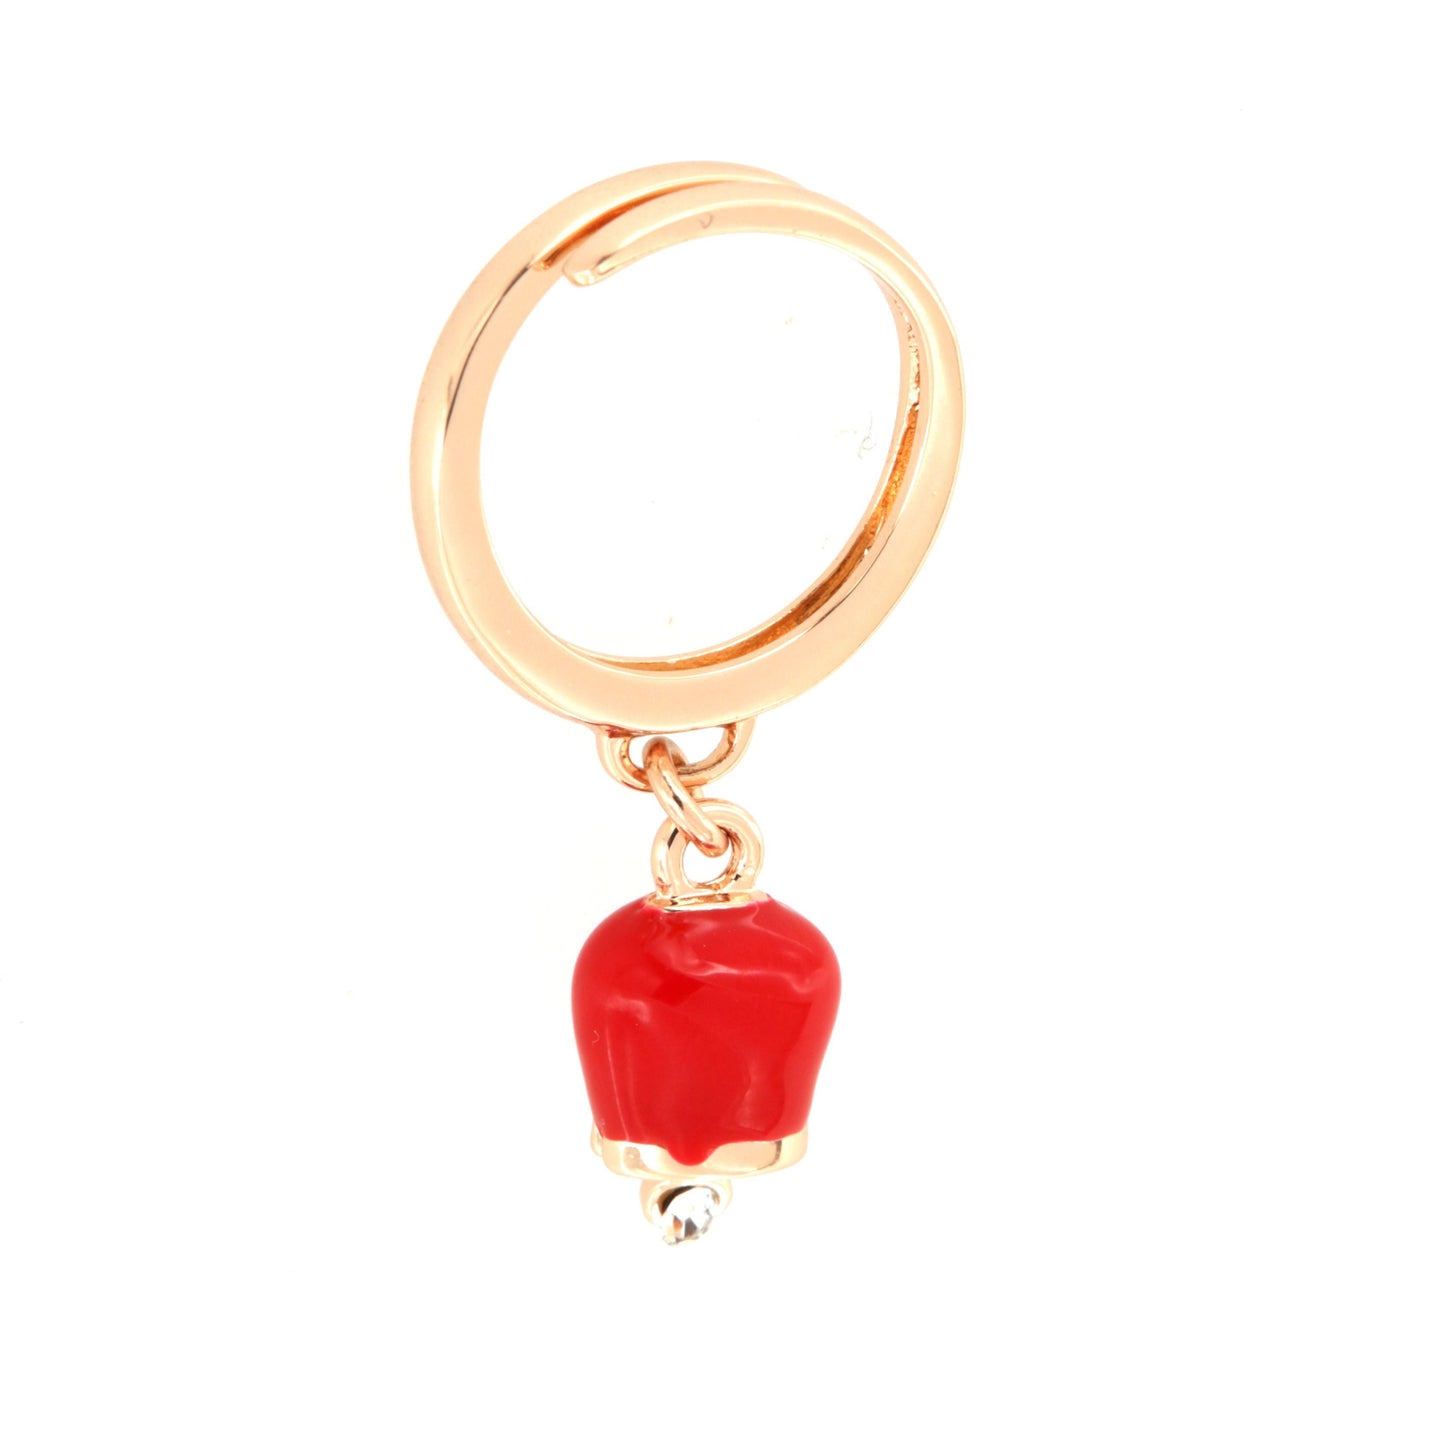 Metal ring with pendant lucky charm, embellished with red enamel and light point